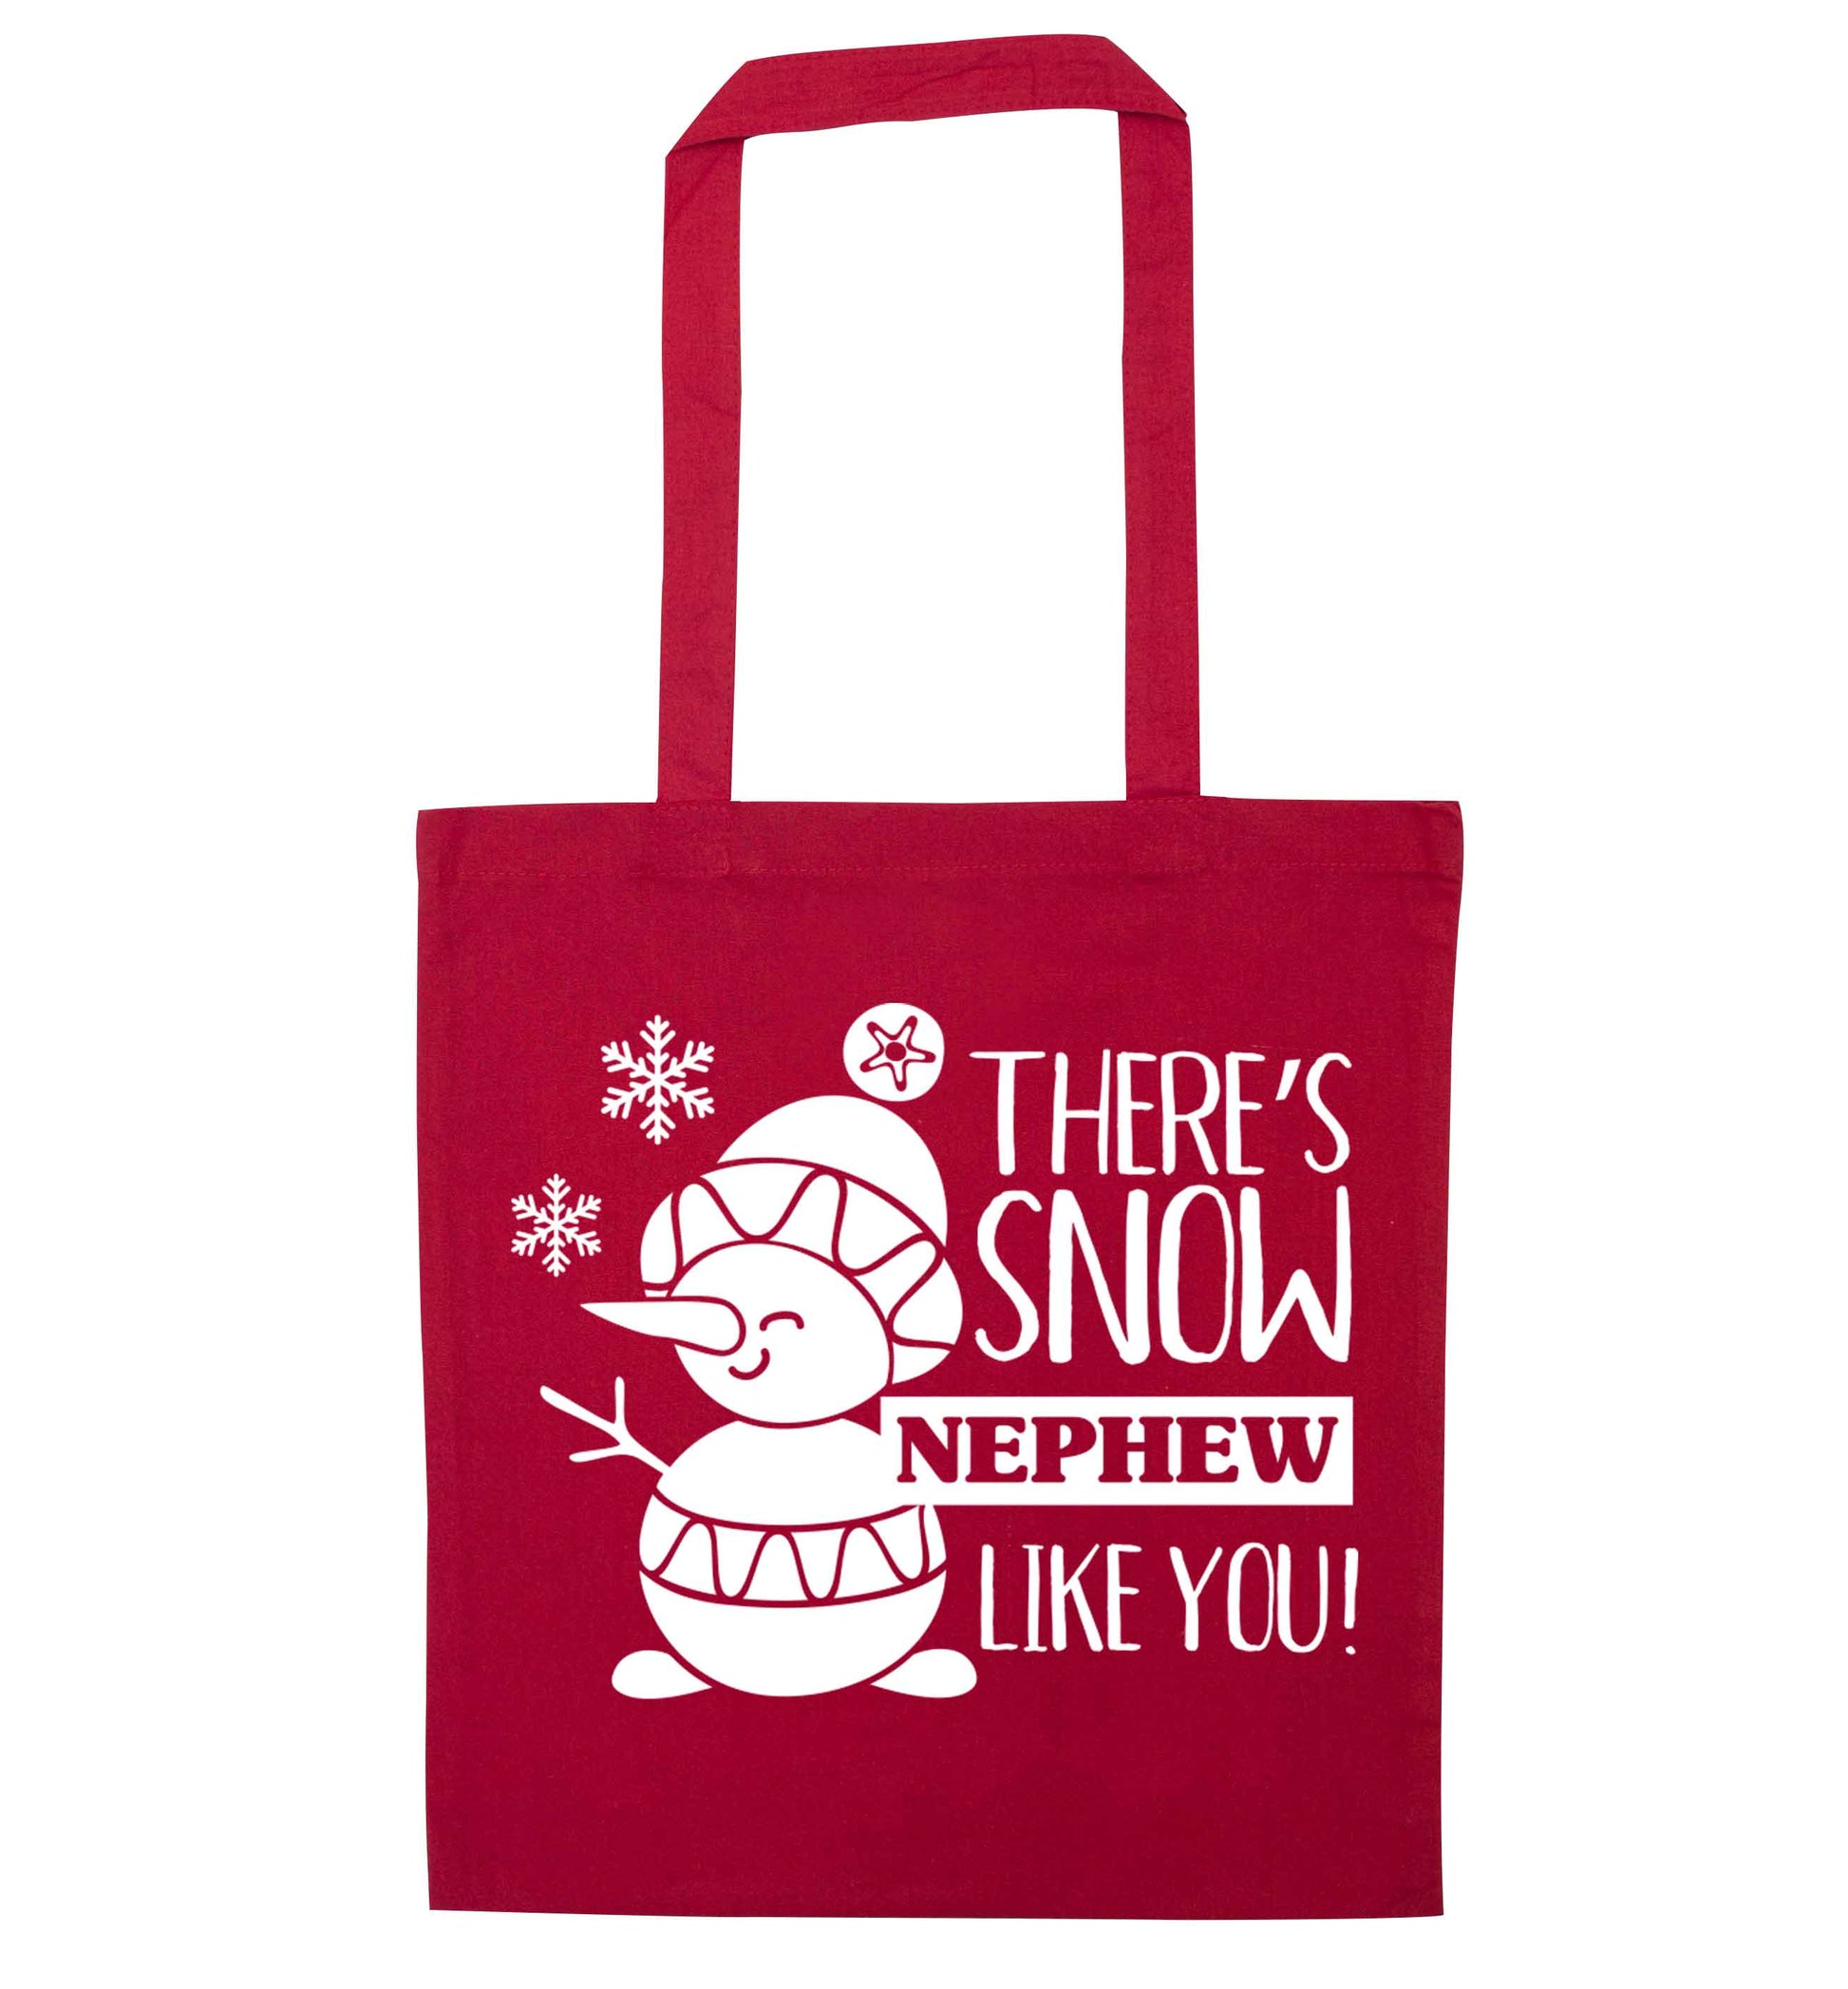 There's snow nephew like you red tote bag